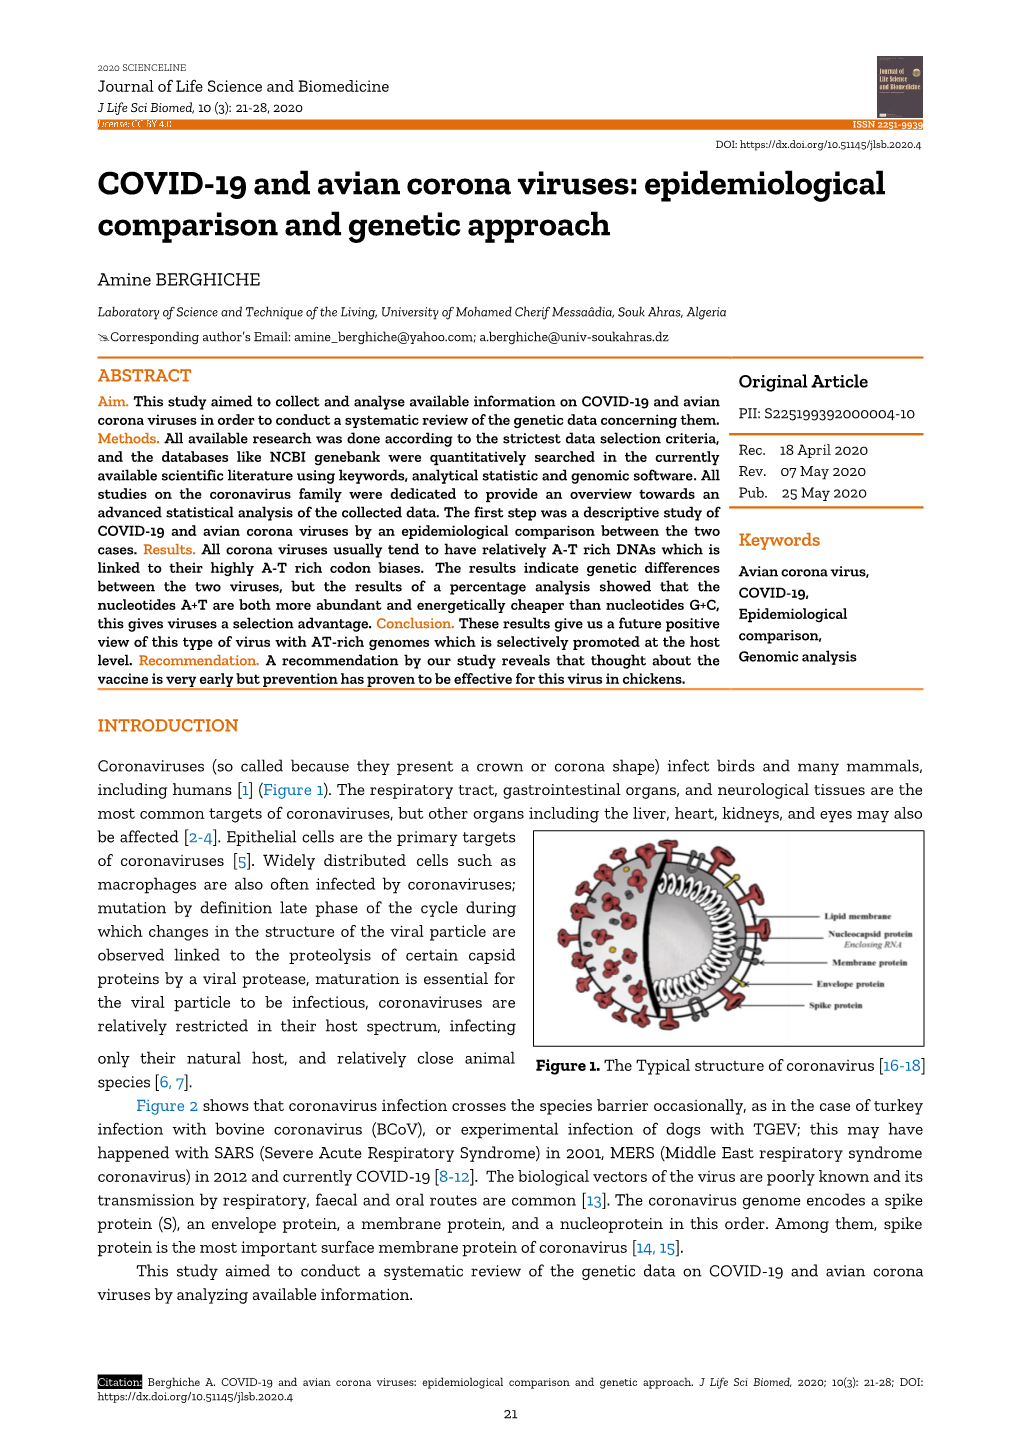 COVID-19 and Avian Corona Viruses: Epidemiological Comparison and Genetic Approach